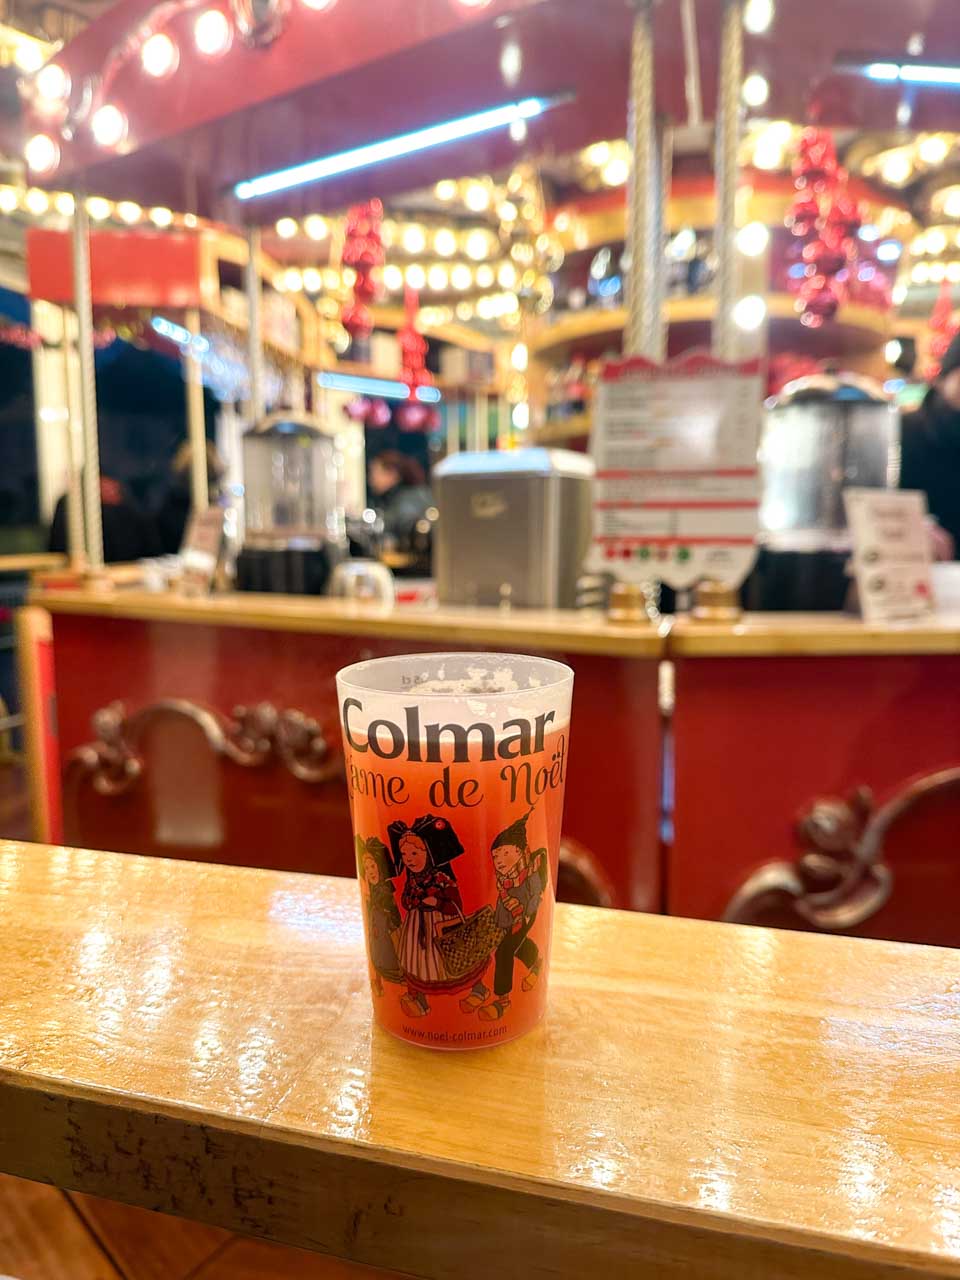 A close-up of a warm cranberry juice cup placed on a wooden counter with a carousel and festive lights softly blurred in the background